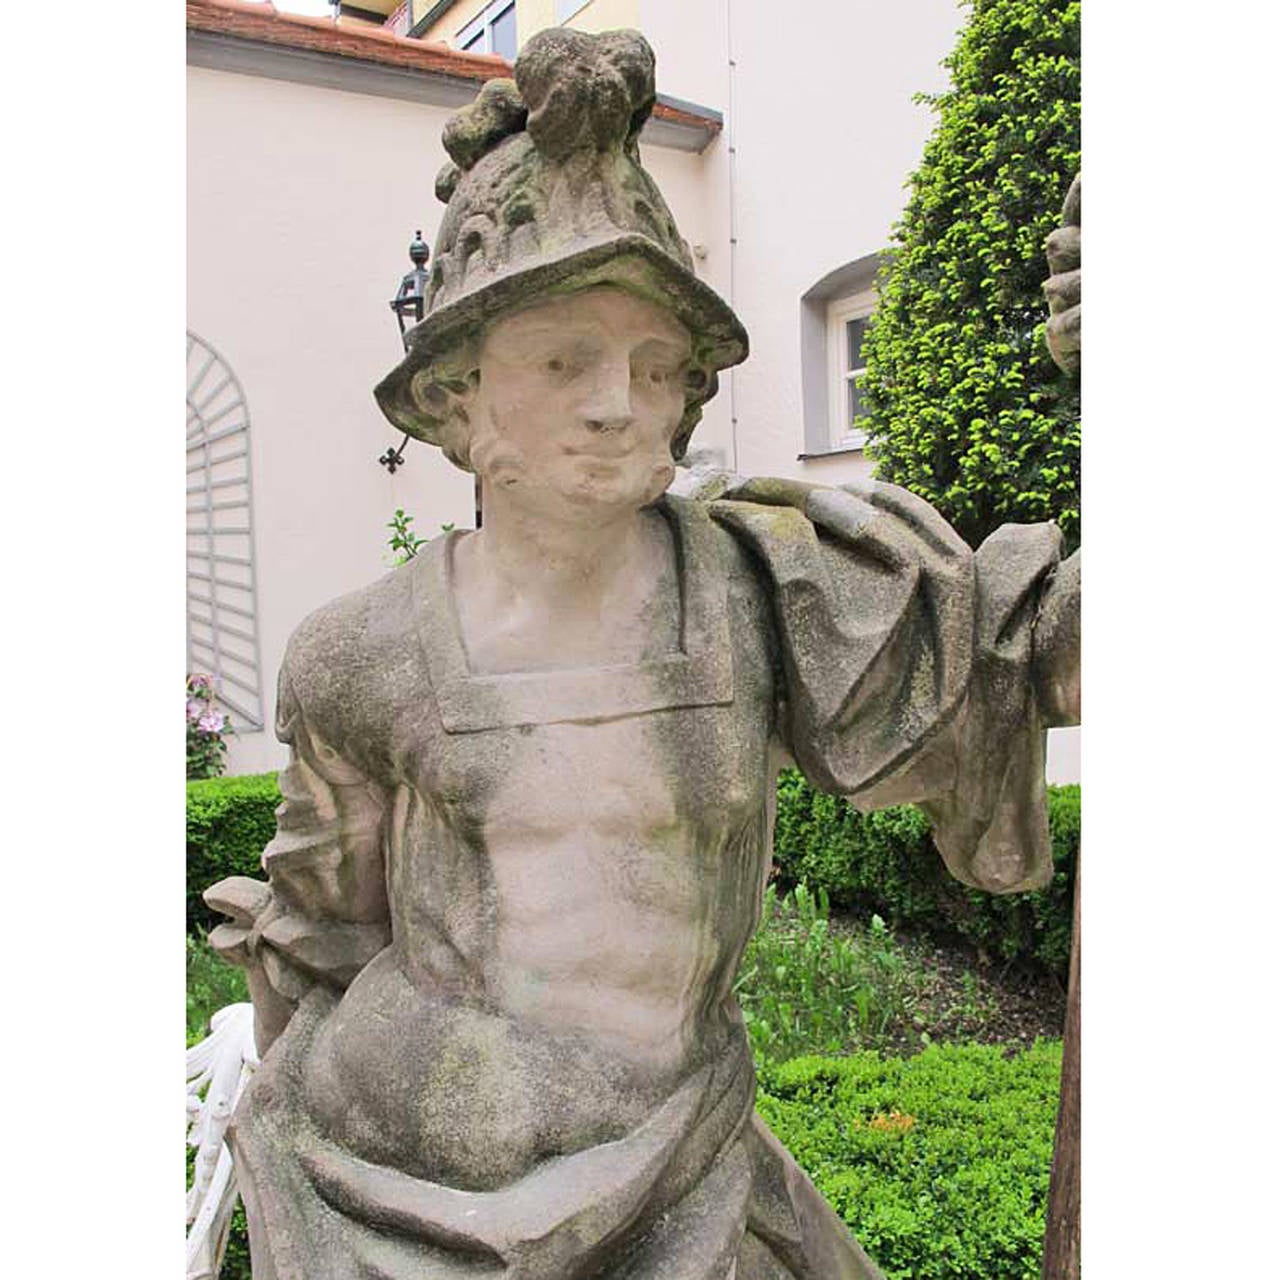 Gorgeous sandstone sculpture, second half of the 18th century, depiction of Mars.
Provenance: Princely collection Wittgenstein, castle Friedewald.
Weathering and age-related damage.